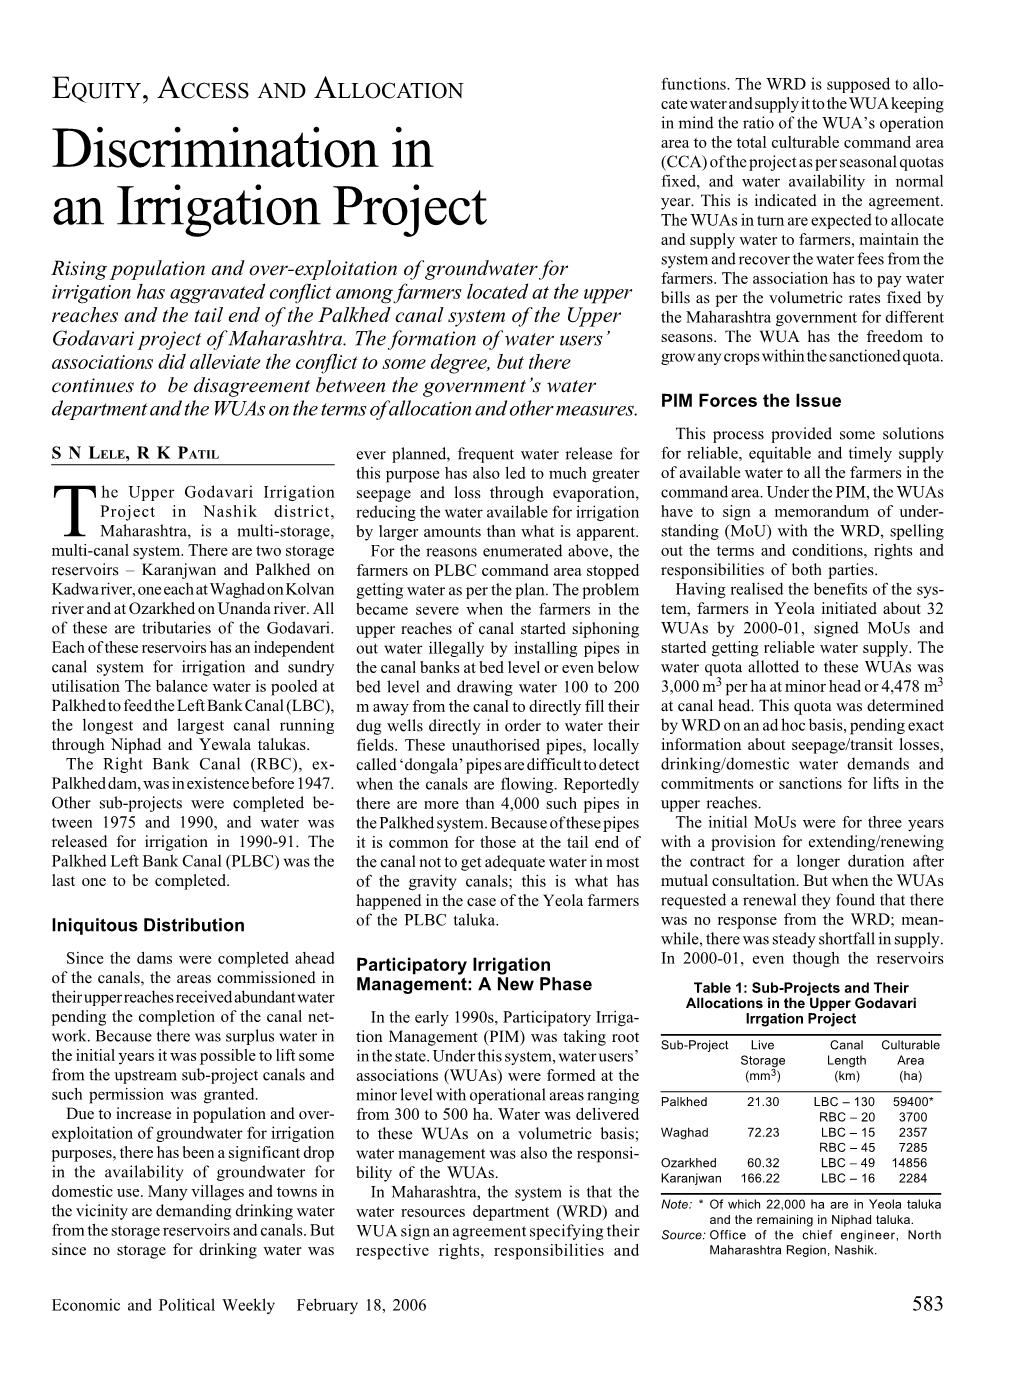 Discrimination in an Irrigation Project